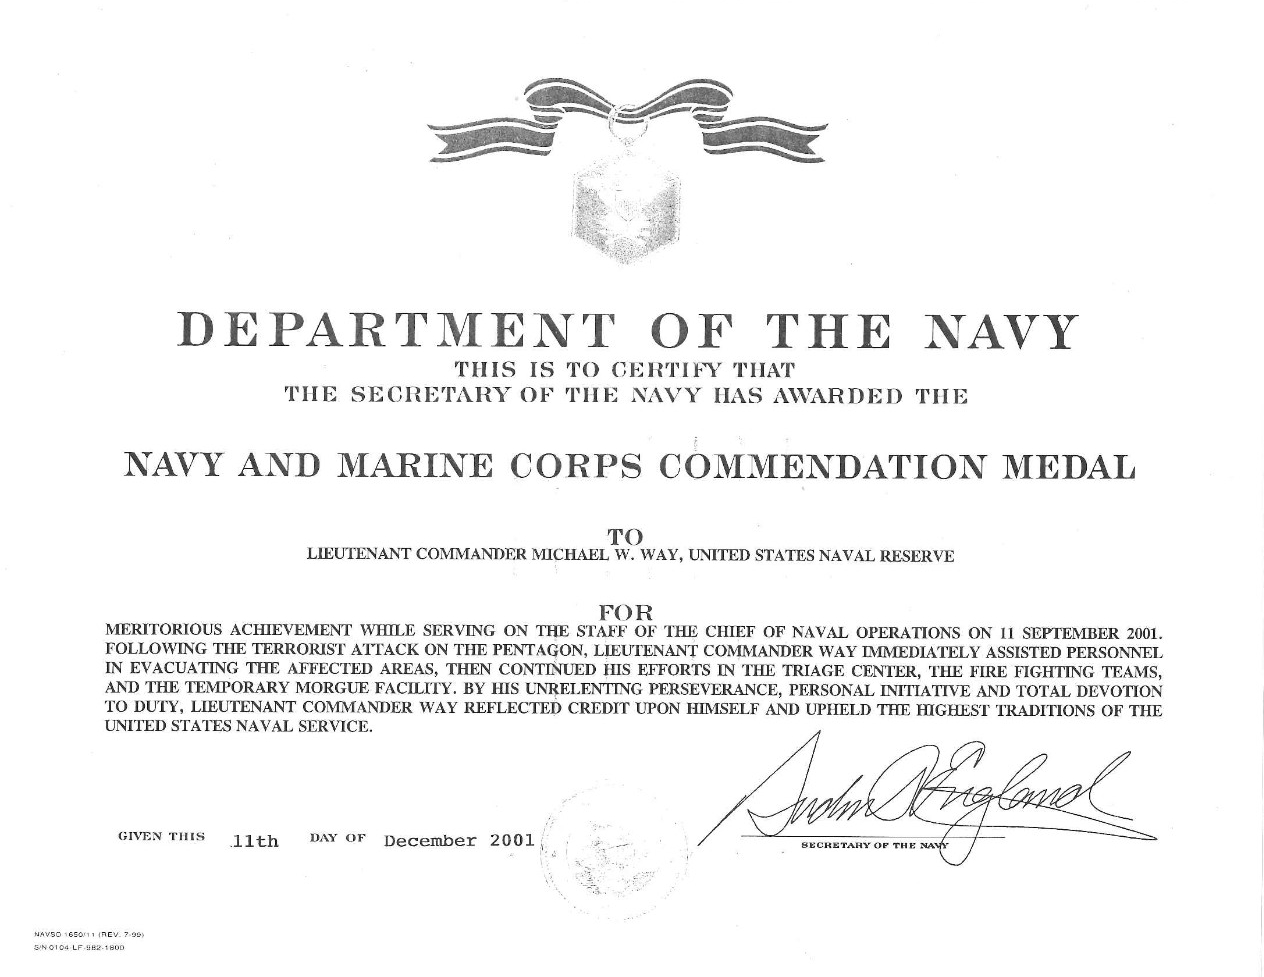 Way, Michael LCDR Navy and Marine Corps Commendation Medal